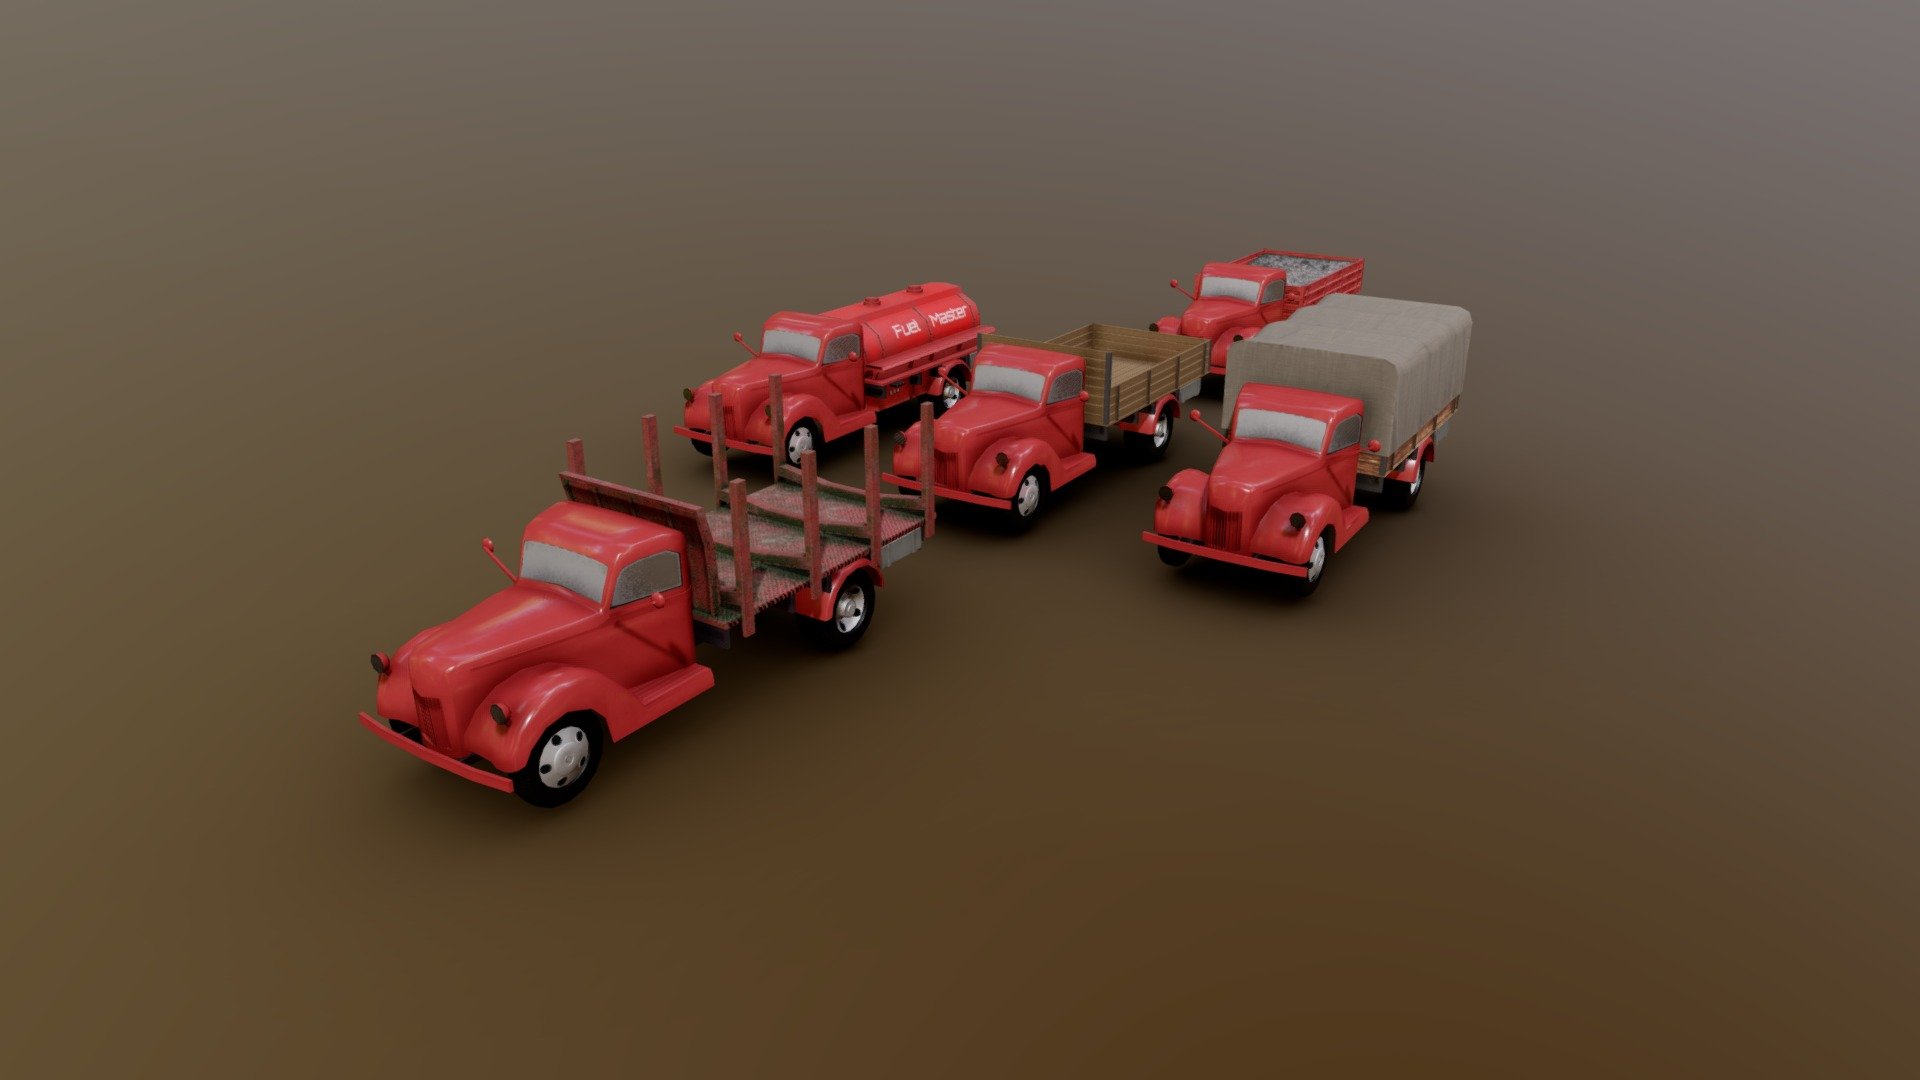 Like my models? By all means please do sub to my patreon or donate! Links on my profile.

An old model from a project that was never meant to be.

A generic looking low-poly german v3000 cargo truck in many variations 3d model